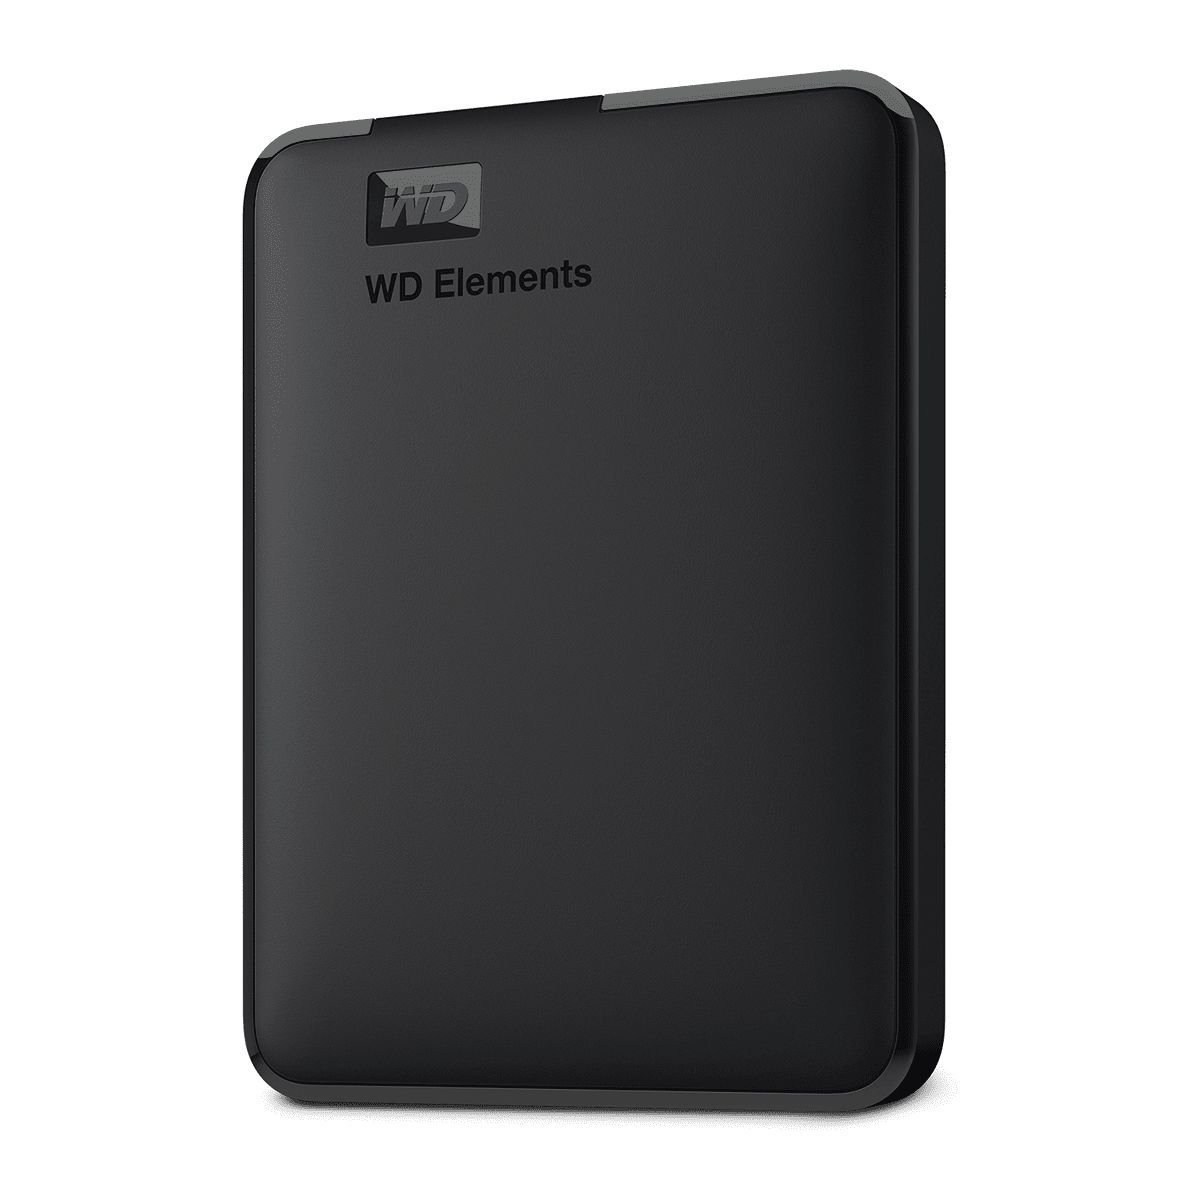 Disque dur externe 5to - 2.5 wd elements portable Western Digital